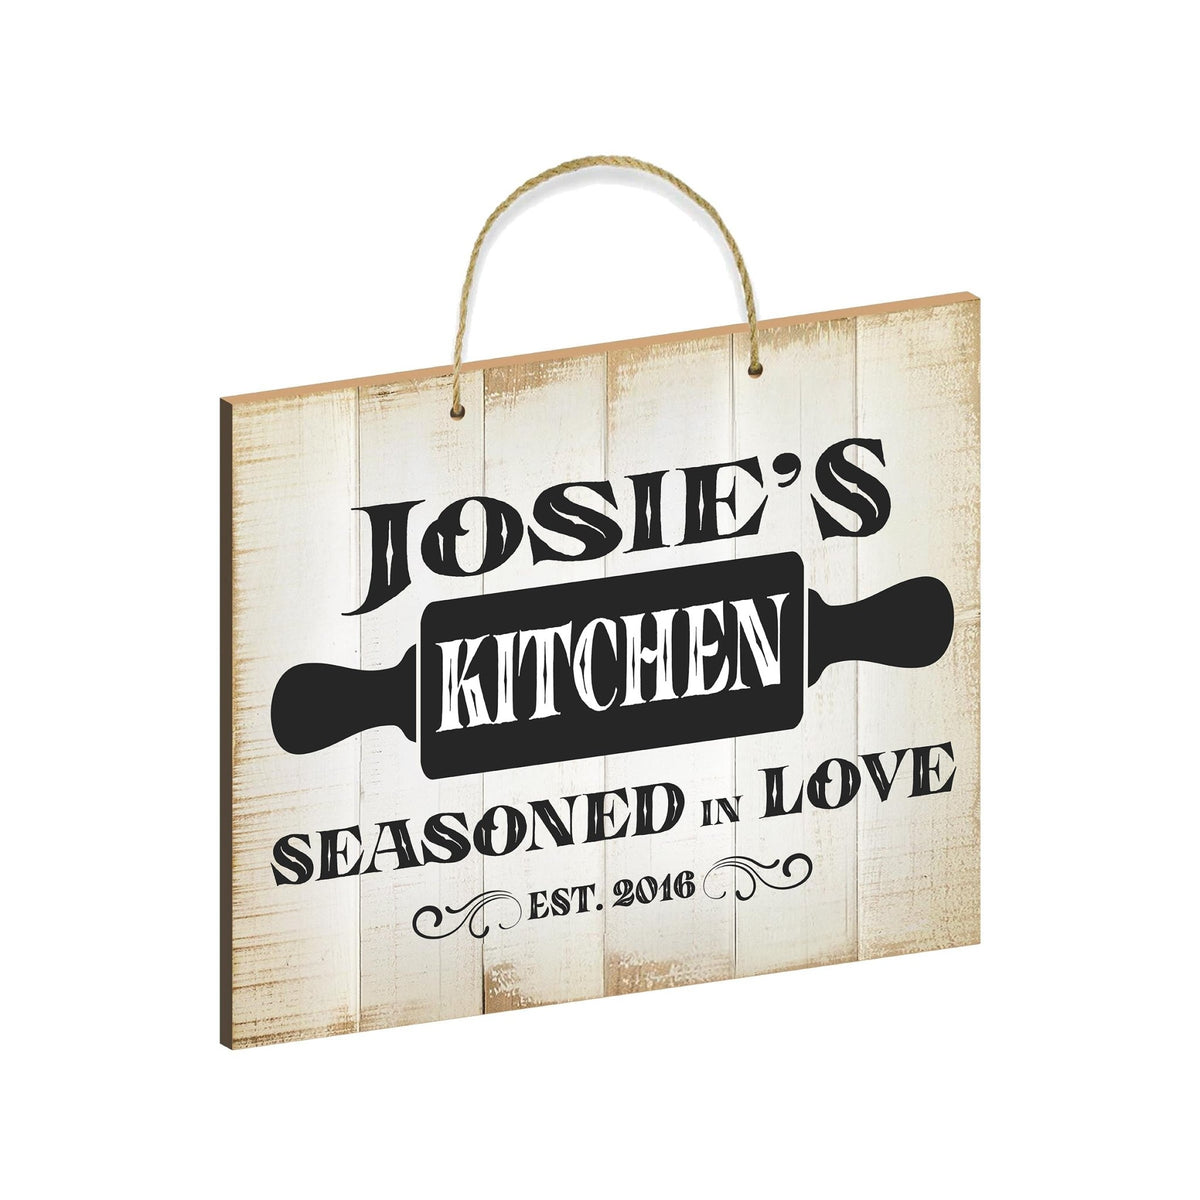 Rustic-Inspired Wooden Wall Hanging Rope Sign For Kitchen &amp; Home Décor - Seasoned